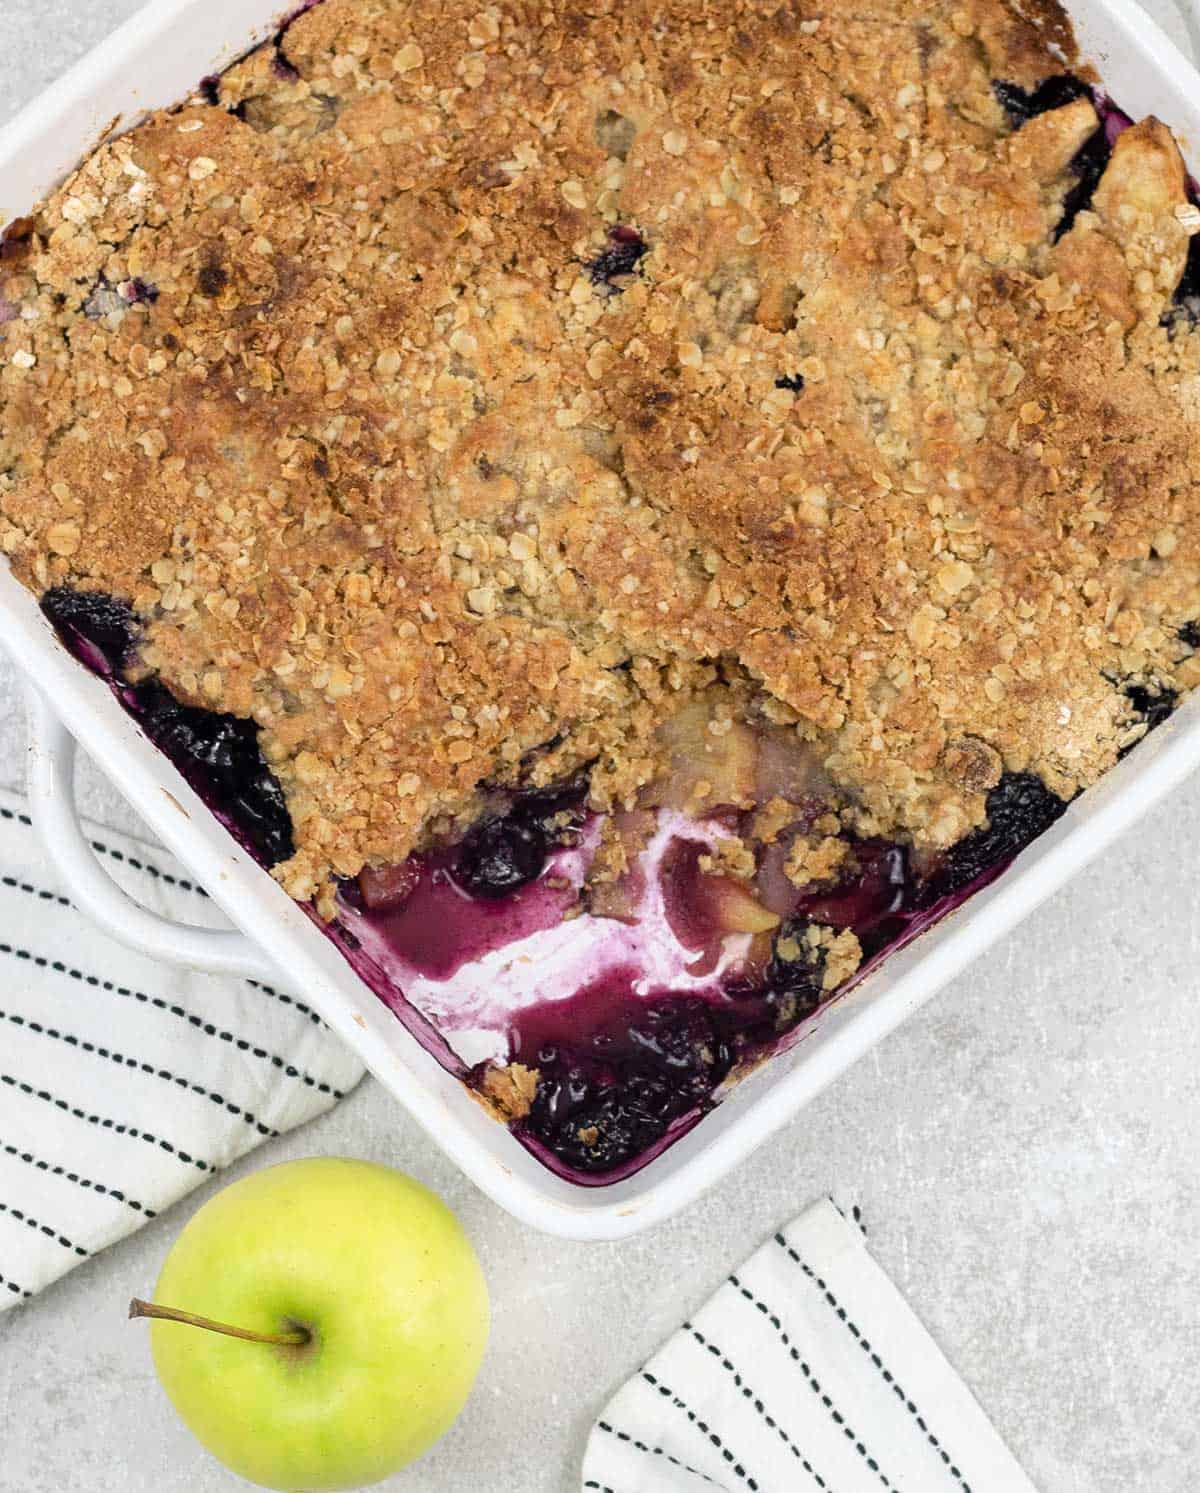 Apple and Blueberry Crumble in a baking pan